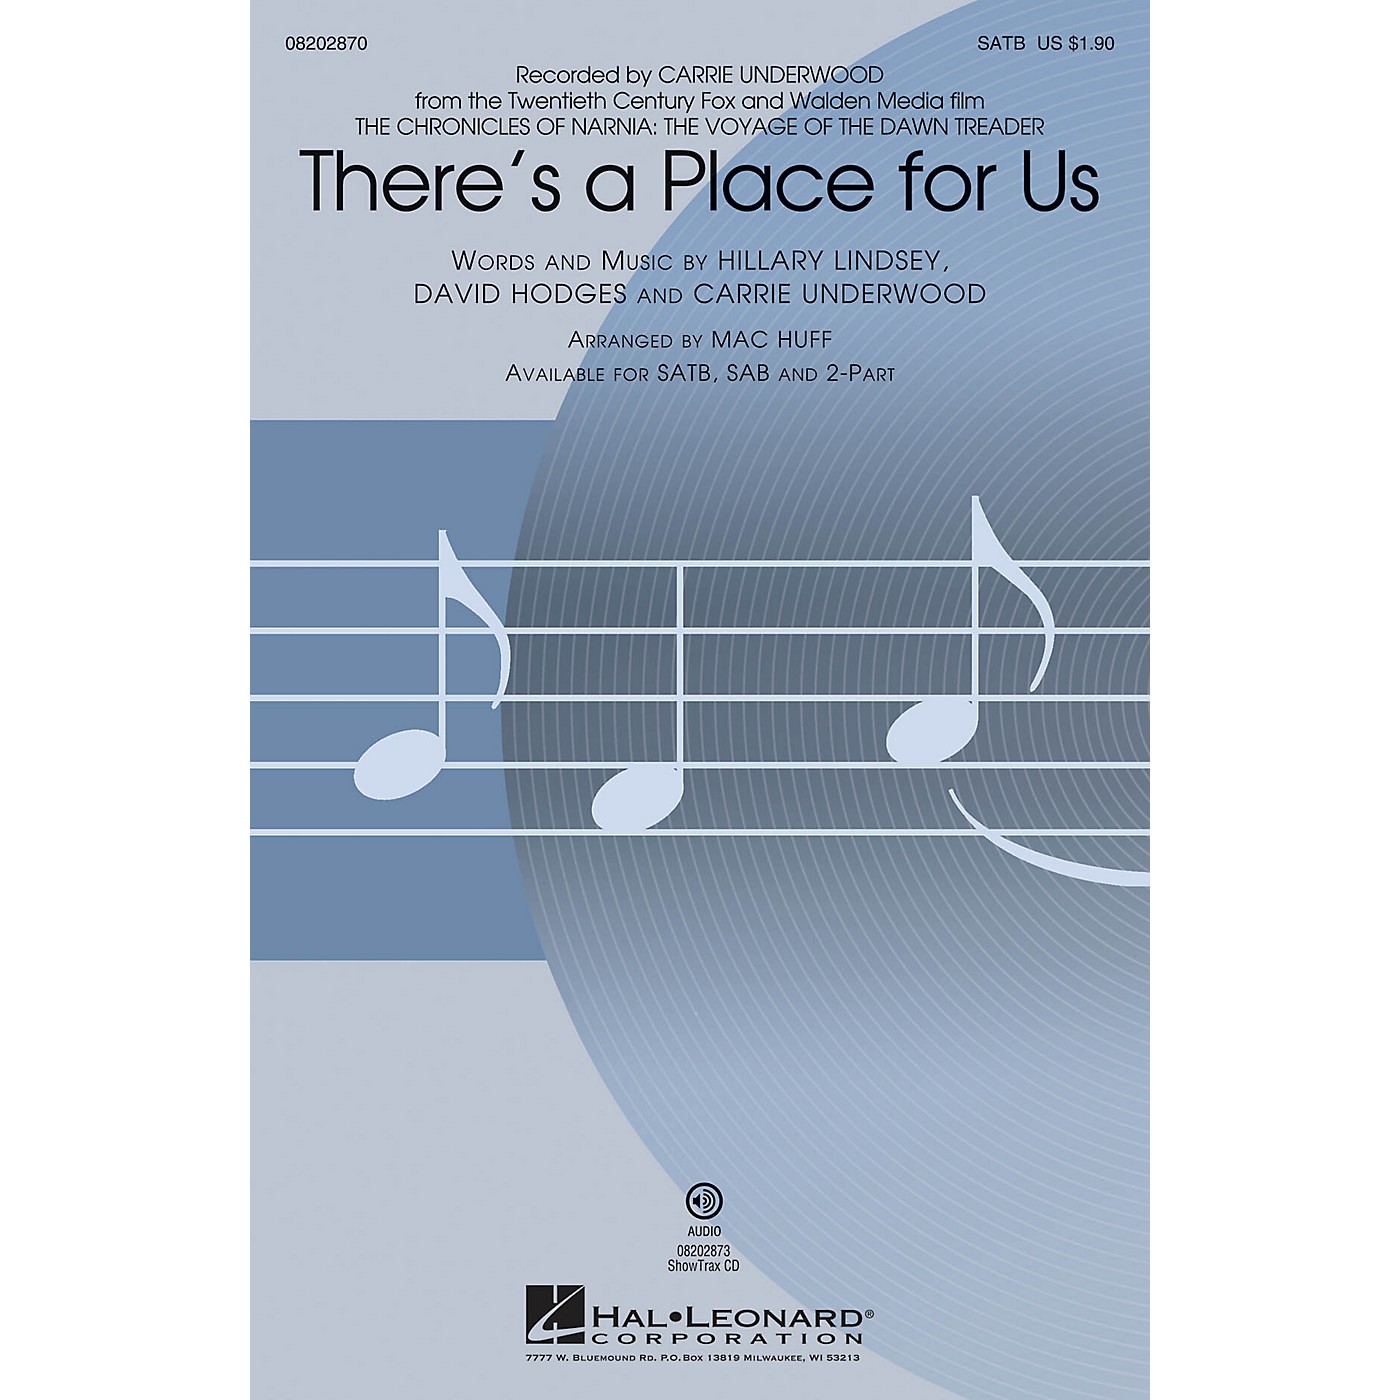 Hal Leonard There's a Place for Us ShowTrax CD by Carrie Underwood Arranged by Mac Huff thumbnail